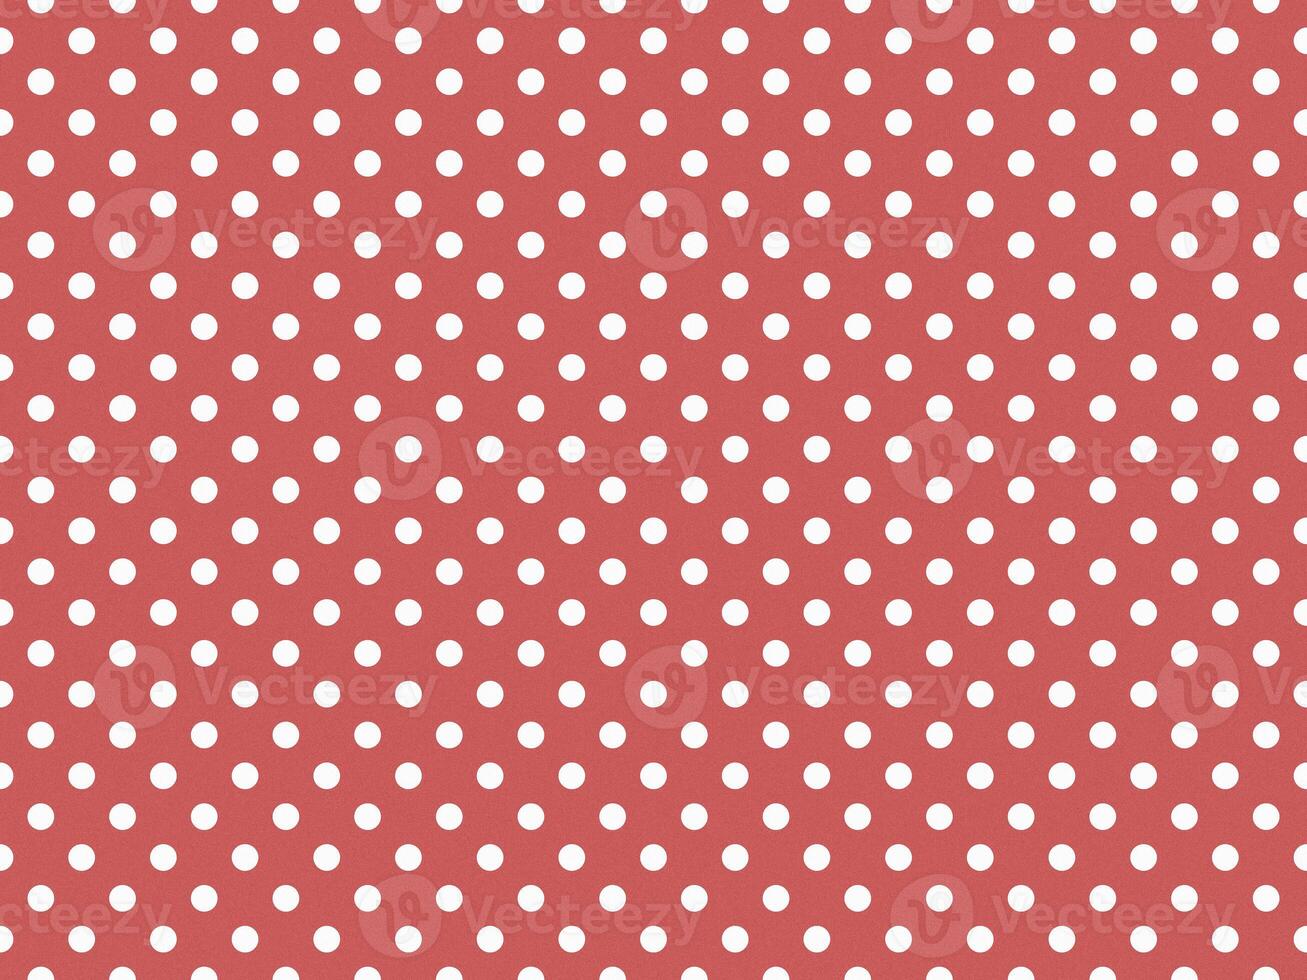 texturised white color polka dots over indian red background photo